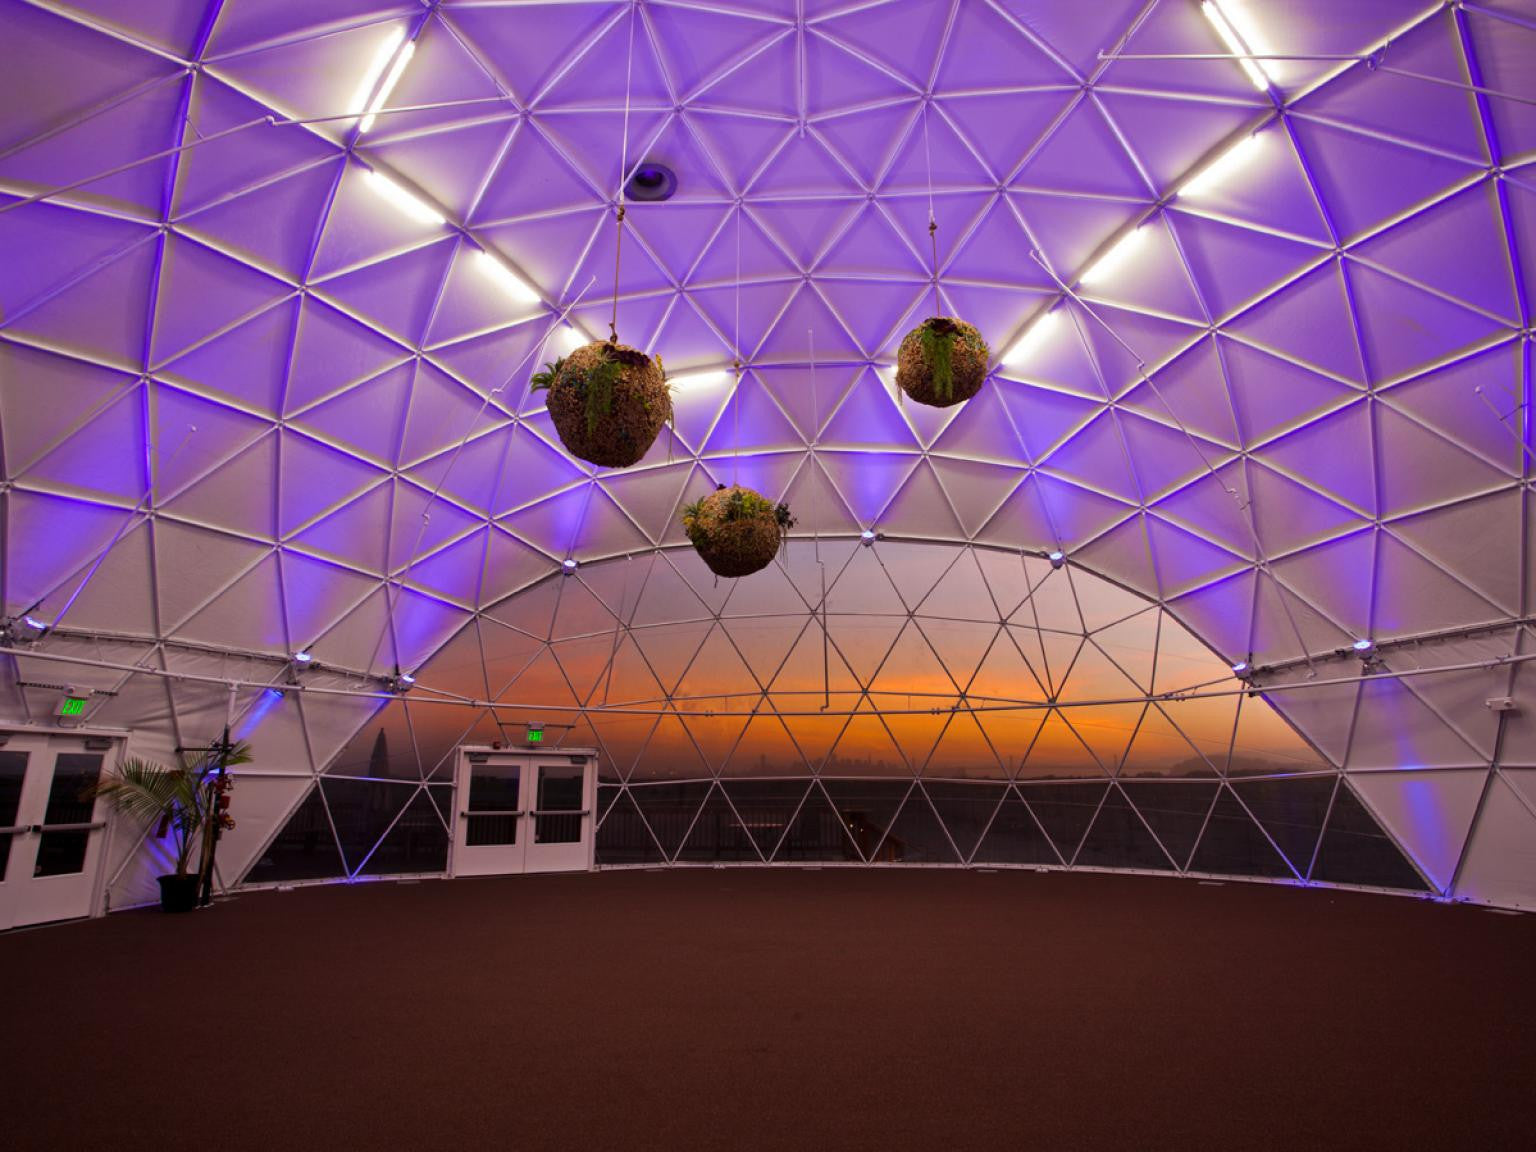 10 Great Reasons to Build a Geodesic Dome